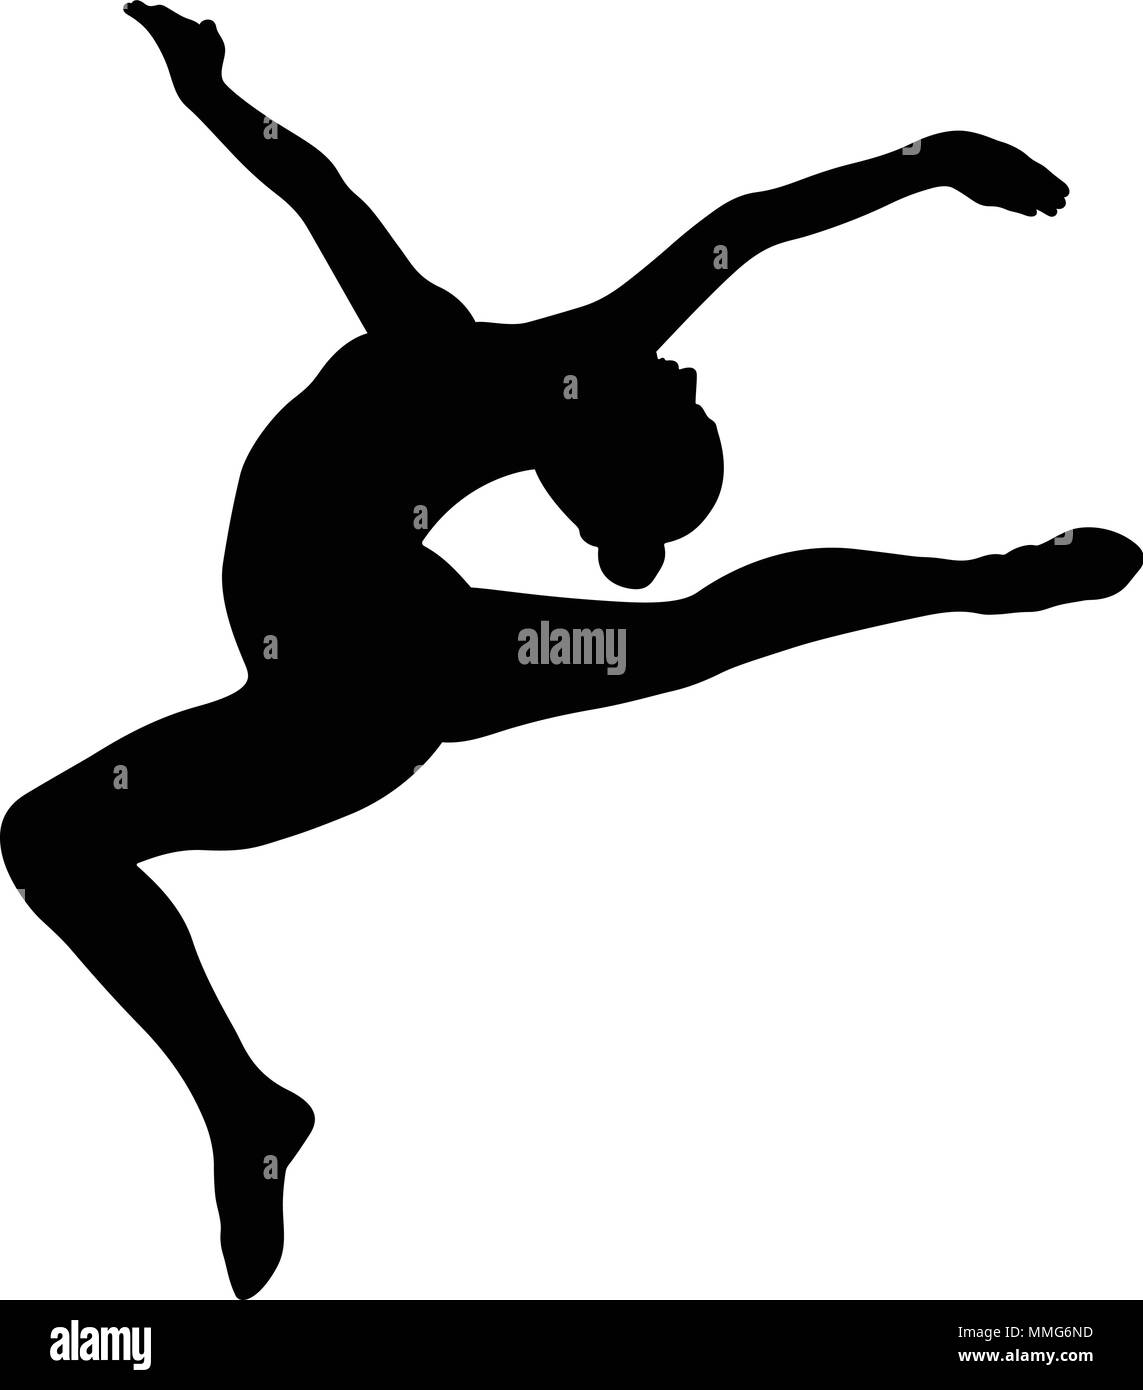 gymnastics clipart black and white leap